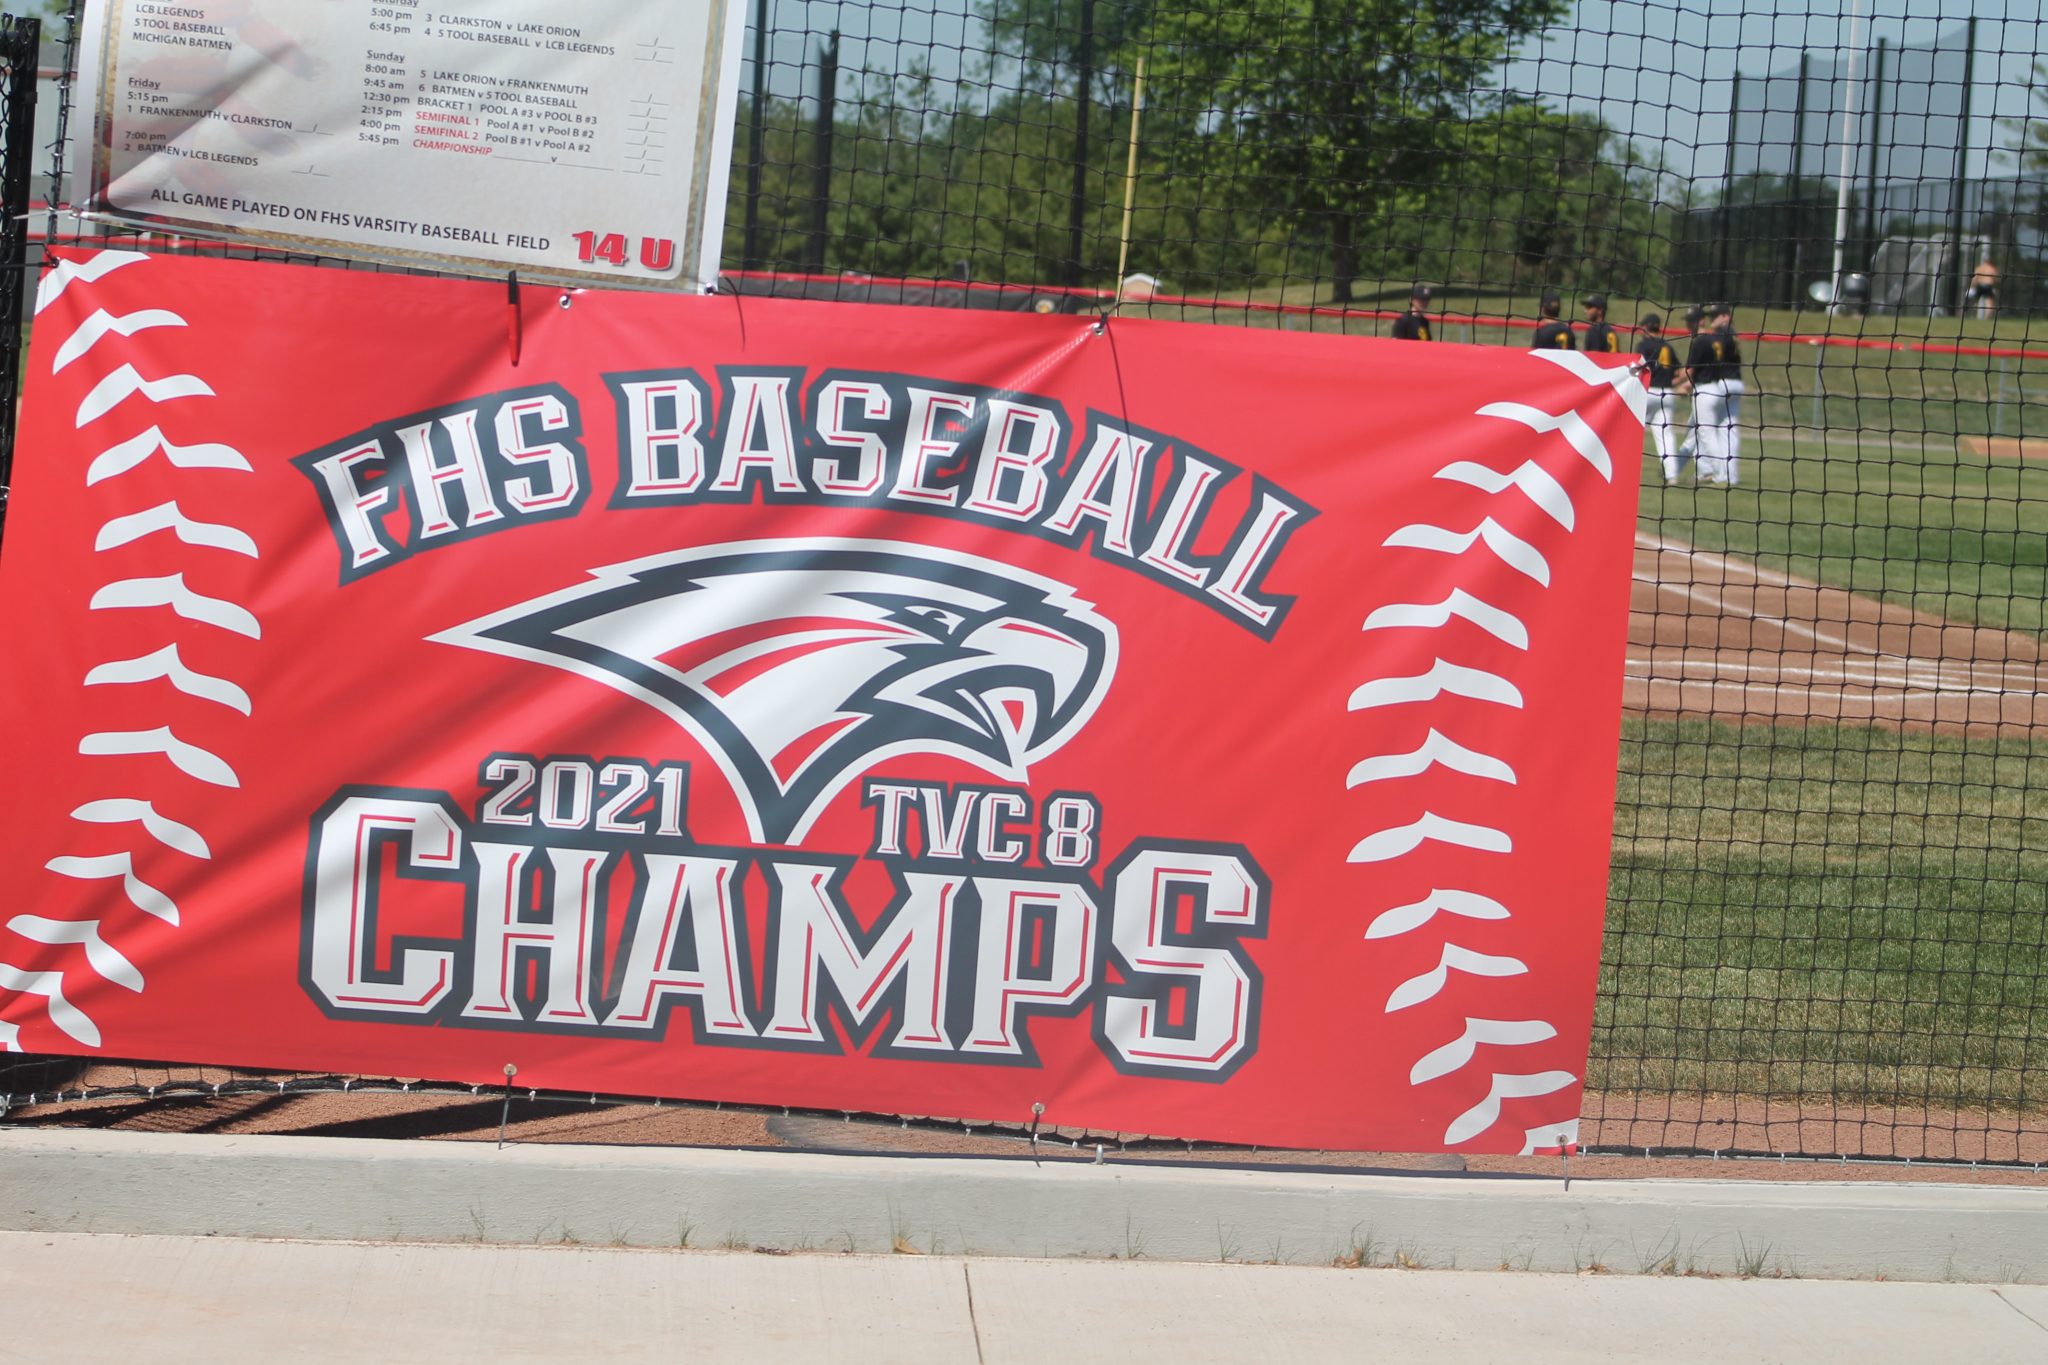 2021 Frankenmuth Eagles Baseball Team Won The Share Of The TVC8